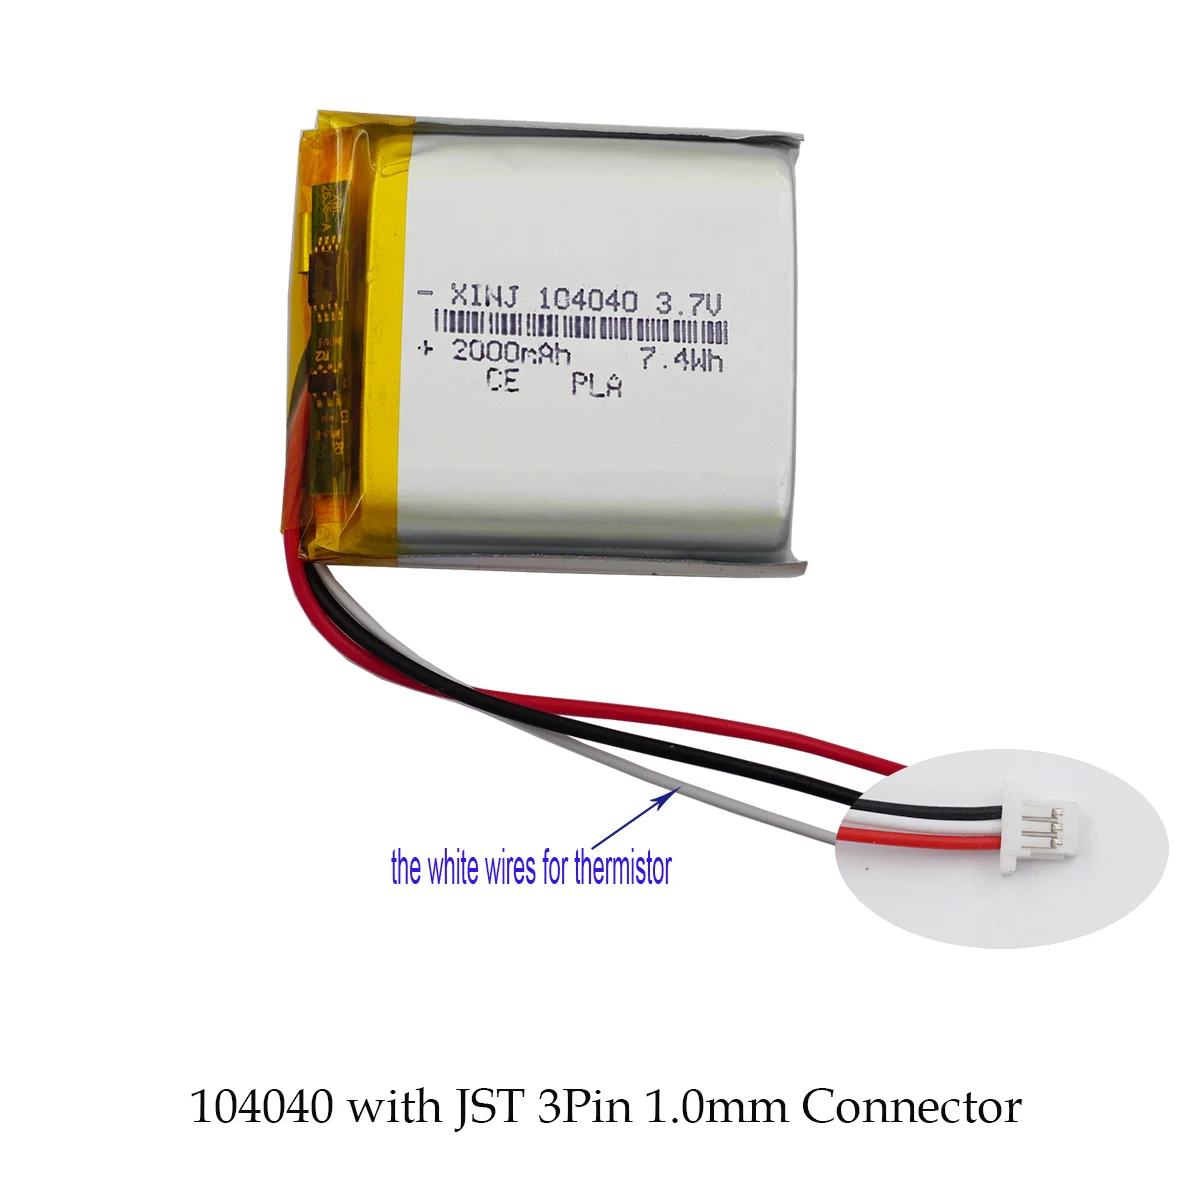 

XINJ 3.7V 2000mAh 7.4Wh Li-Polymer 3 Wires Thermistor Li Lipo Battery 104040 3Pin 1.0mm JST Connector For GPS DashCam Tablet PC